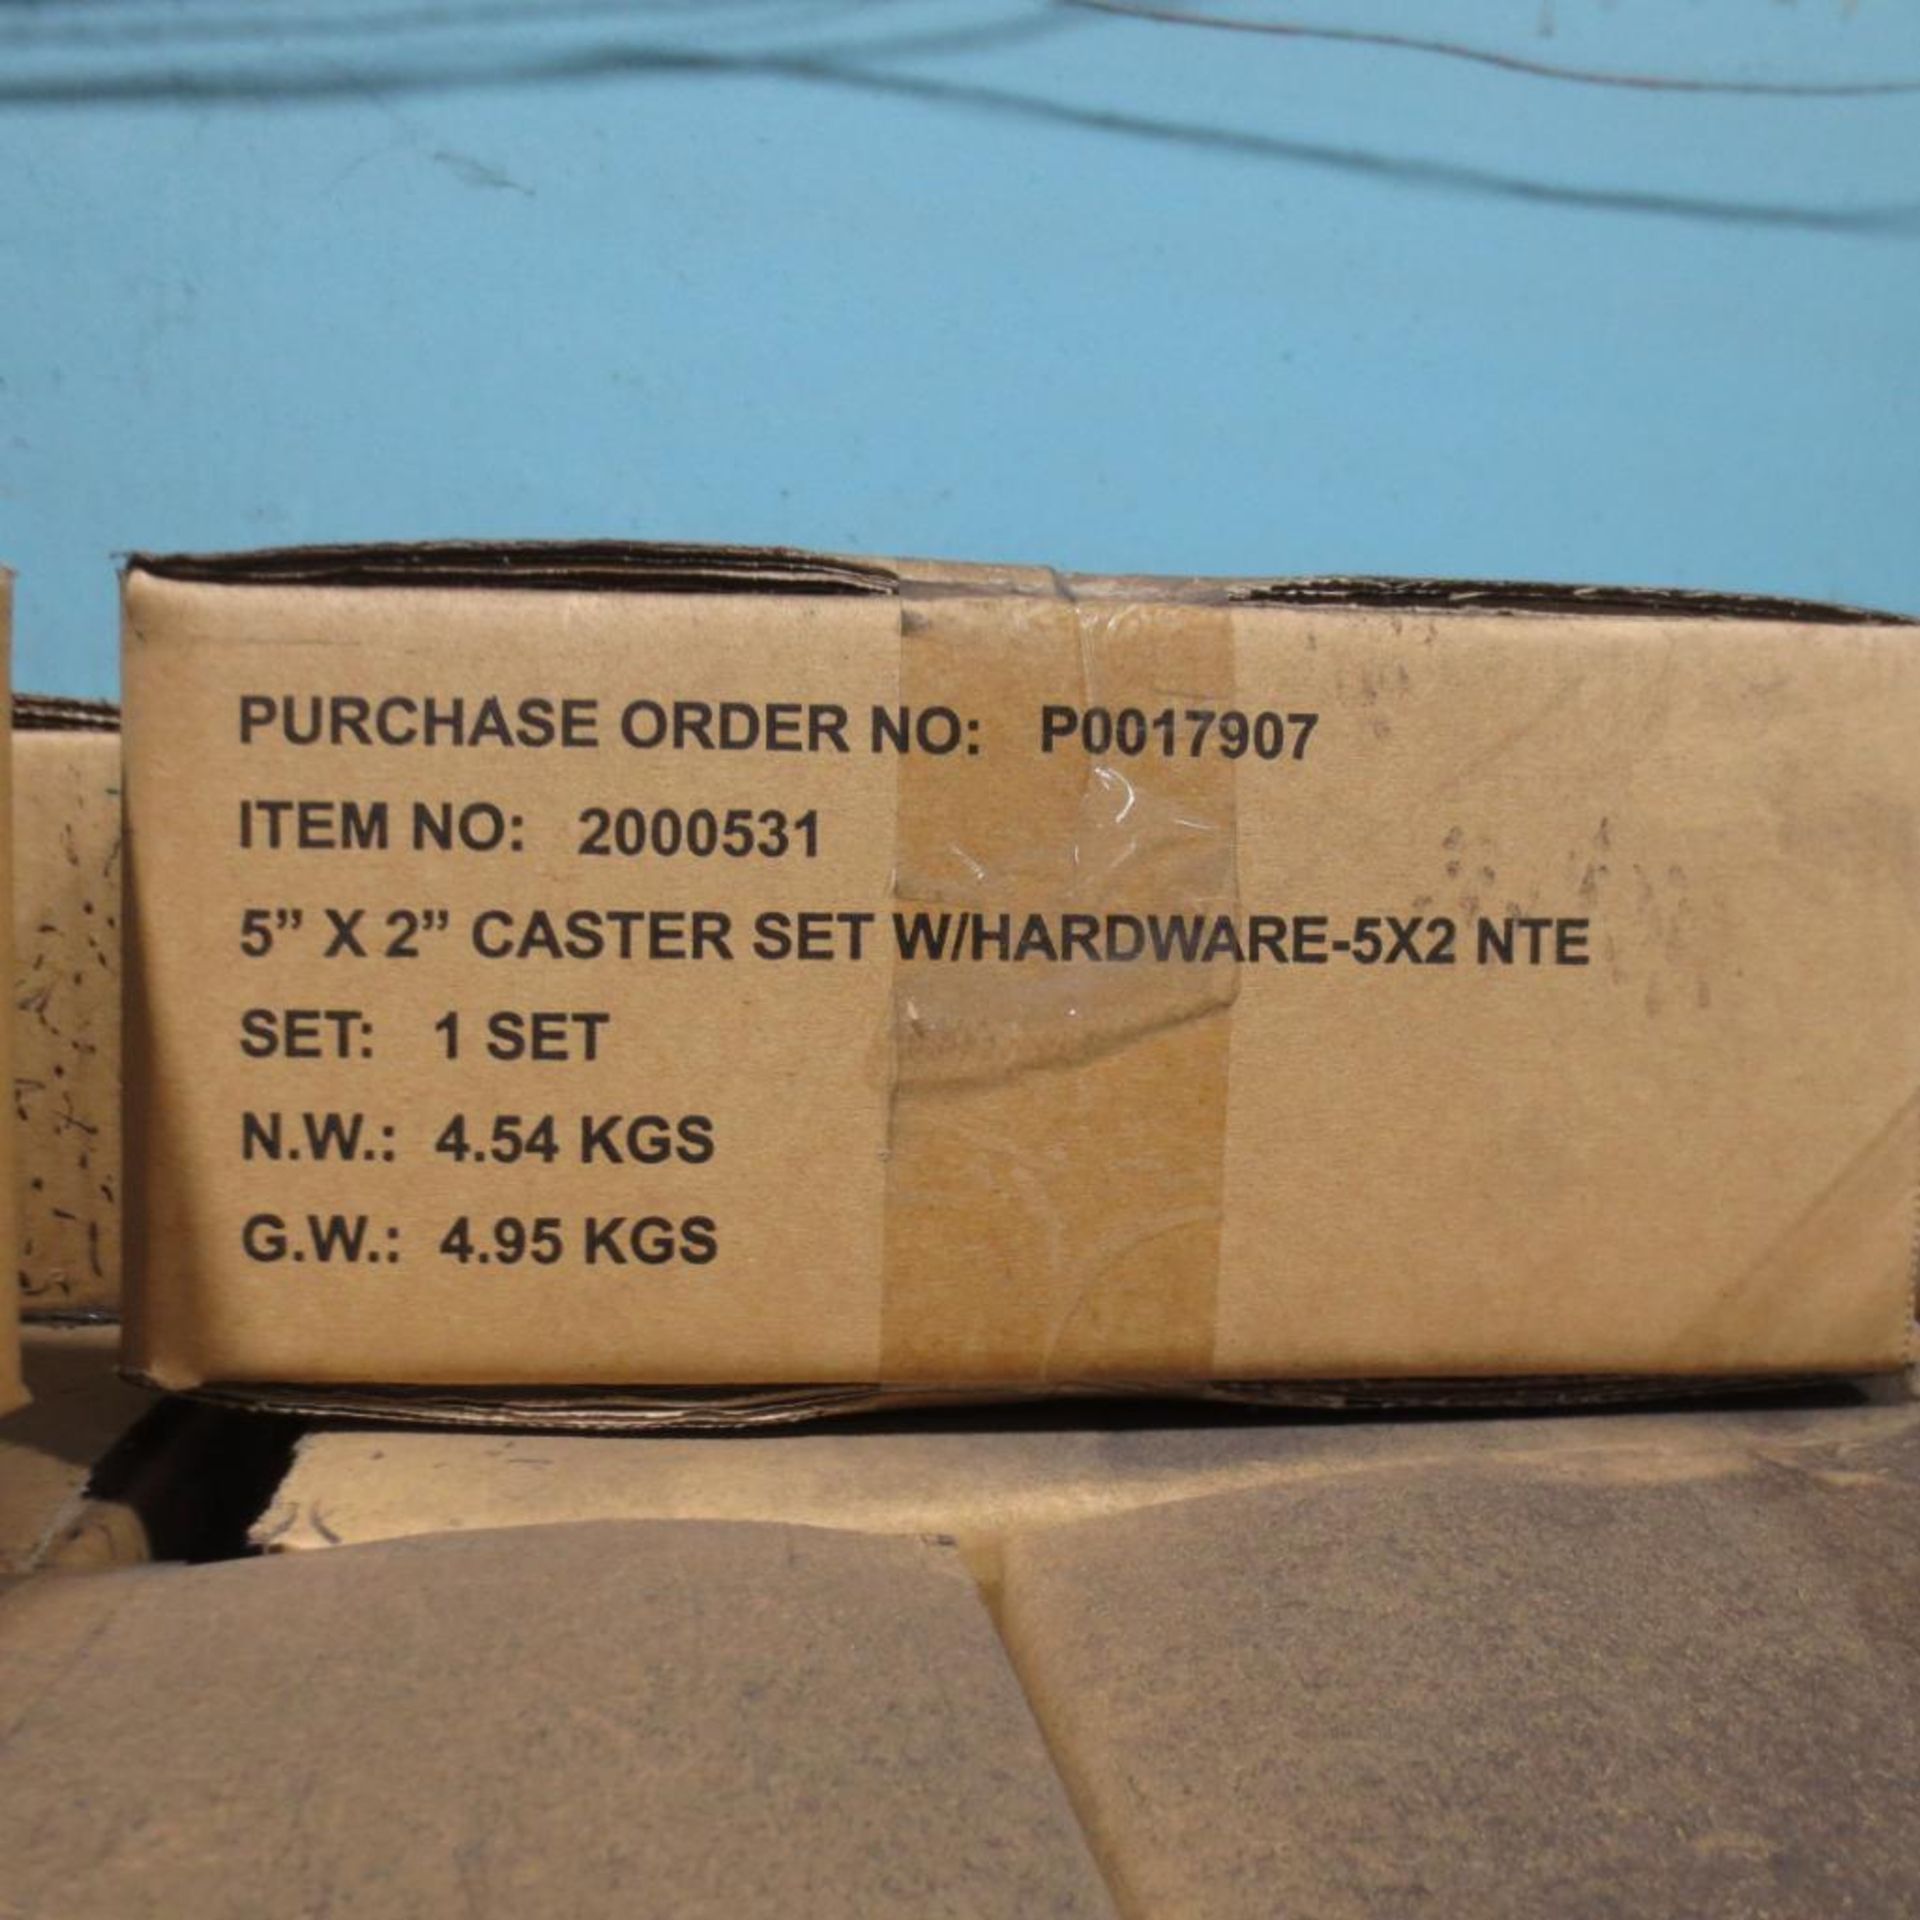 Appx. 180 Boxes 5"x2" Caster Set 2000531, Loc East Wall - Image 3 of 4